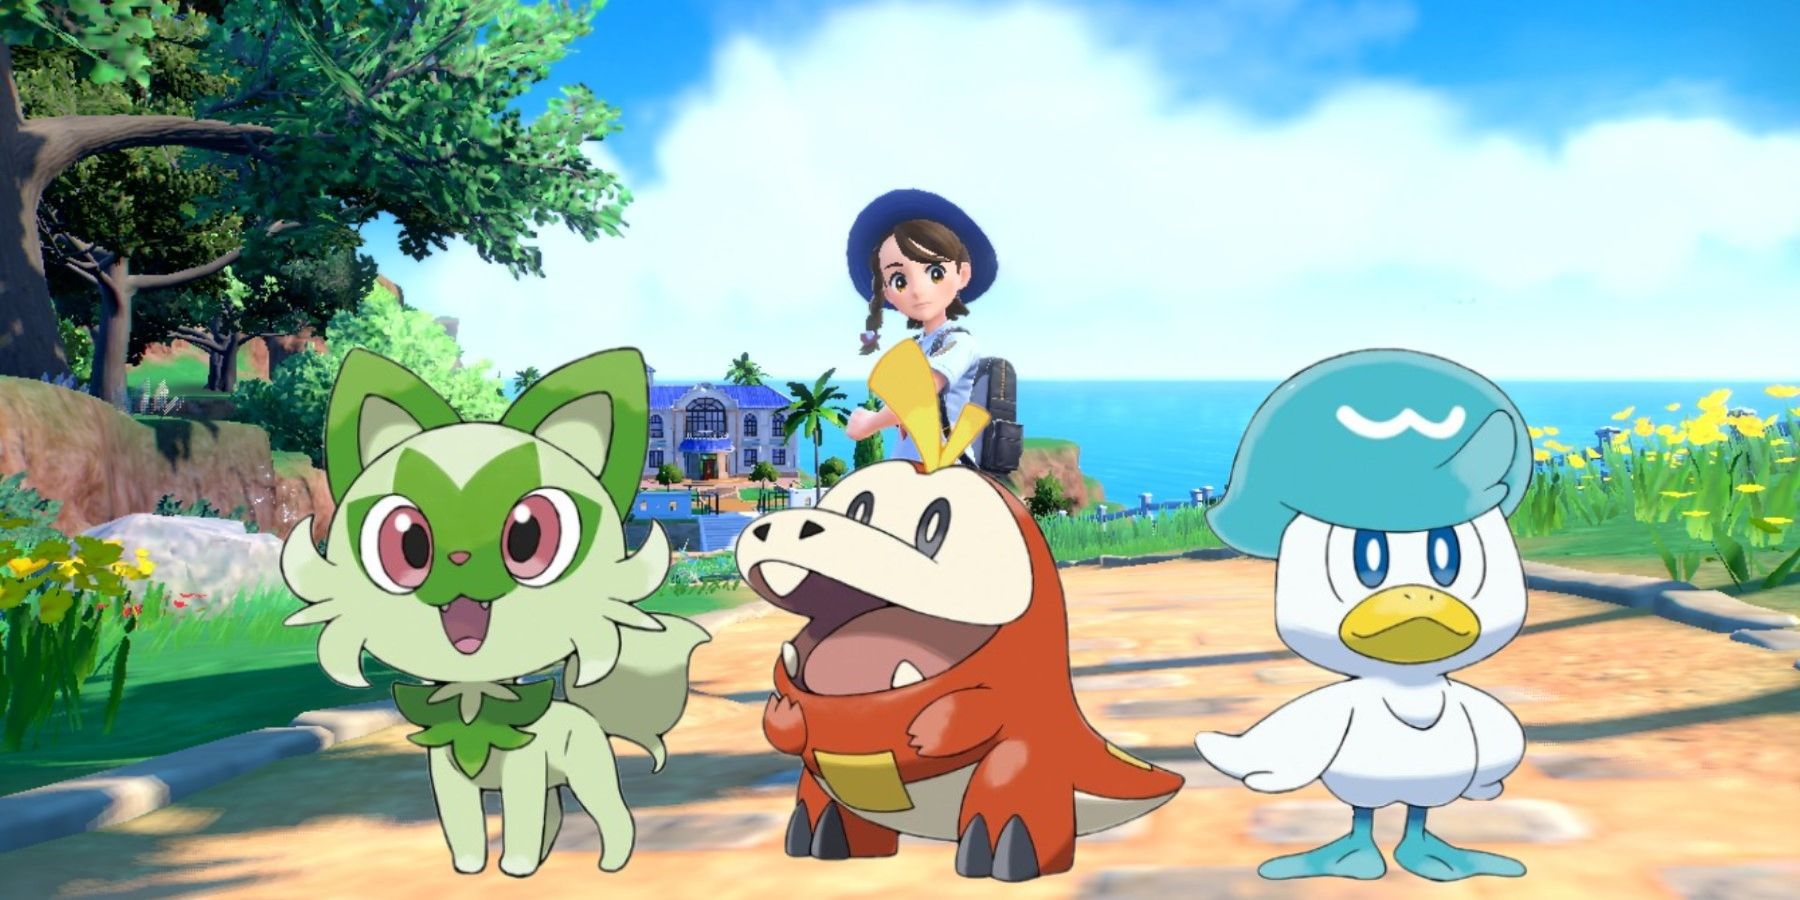 New Pokémon series will feature Scarlet and Violet starters - The Verge